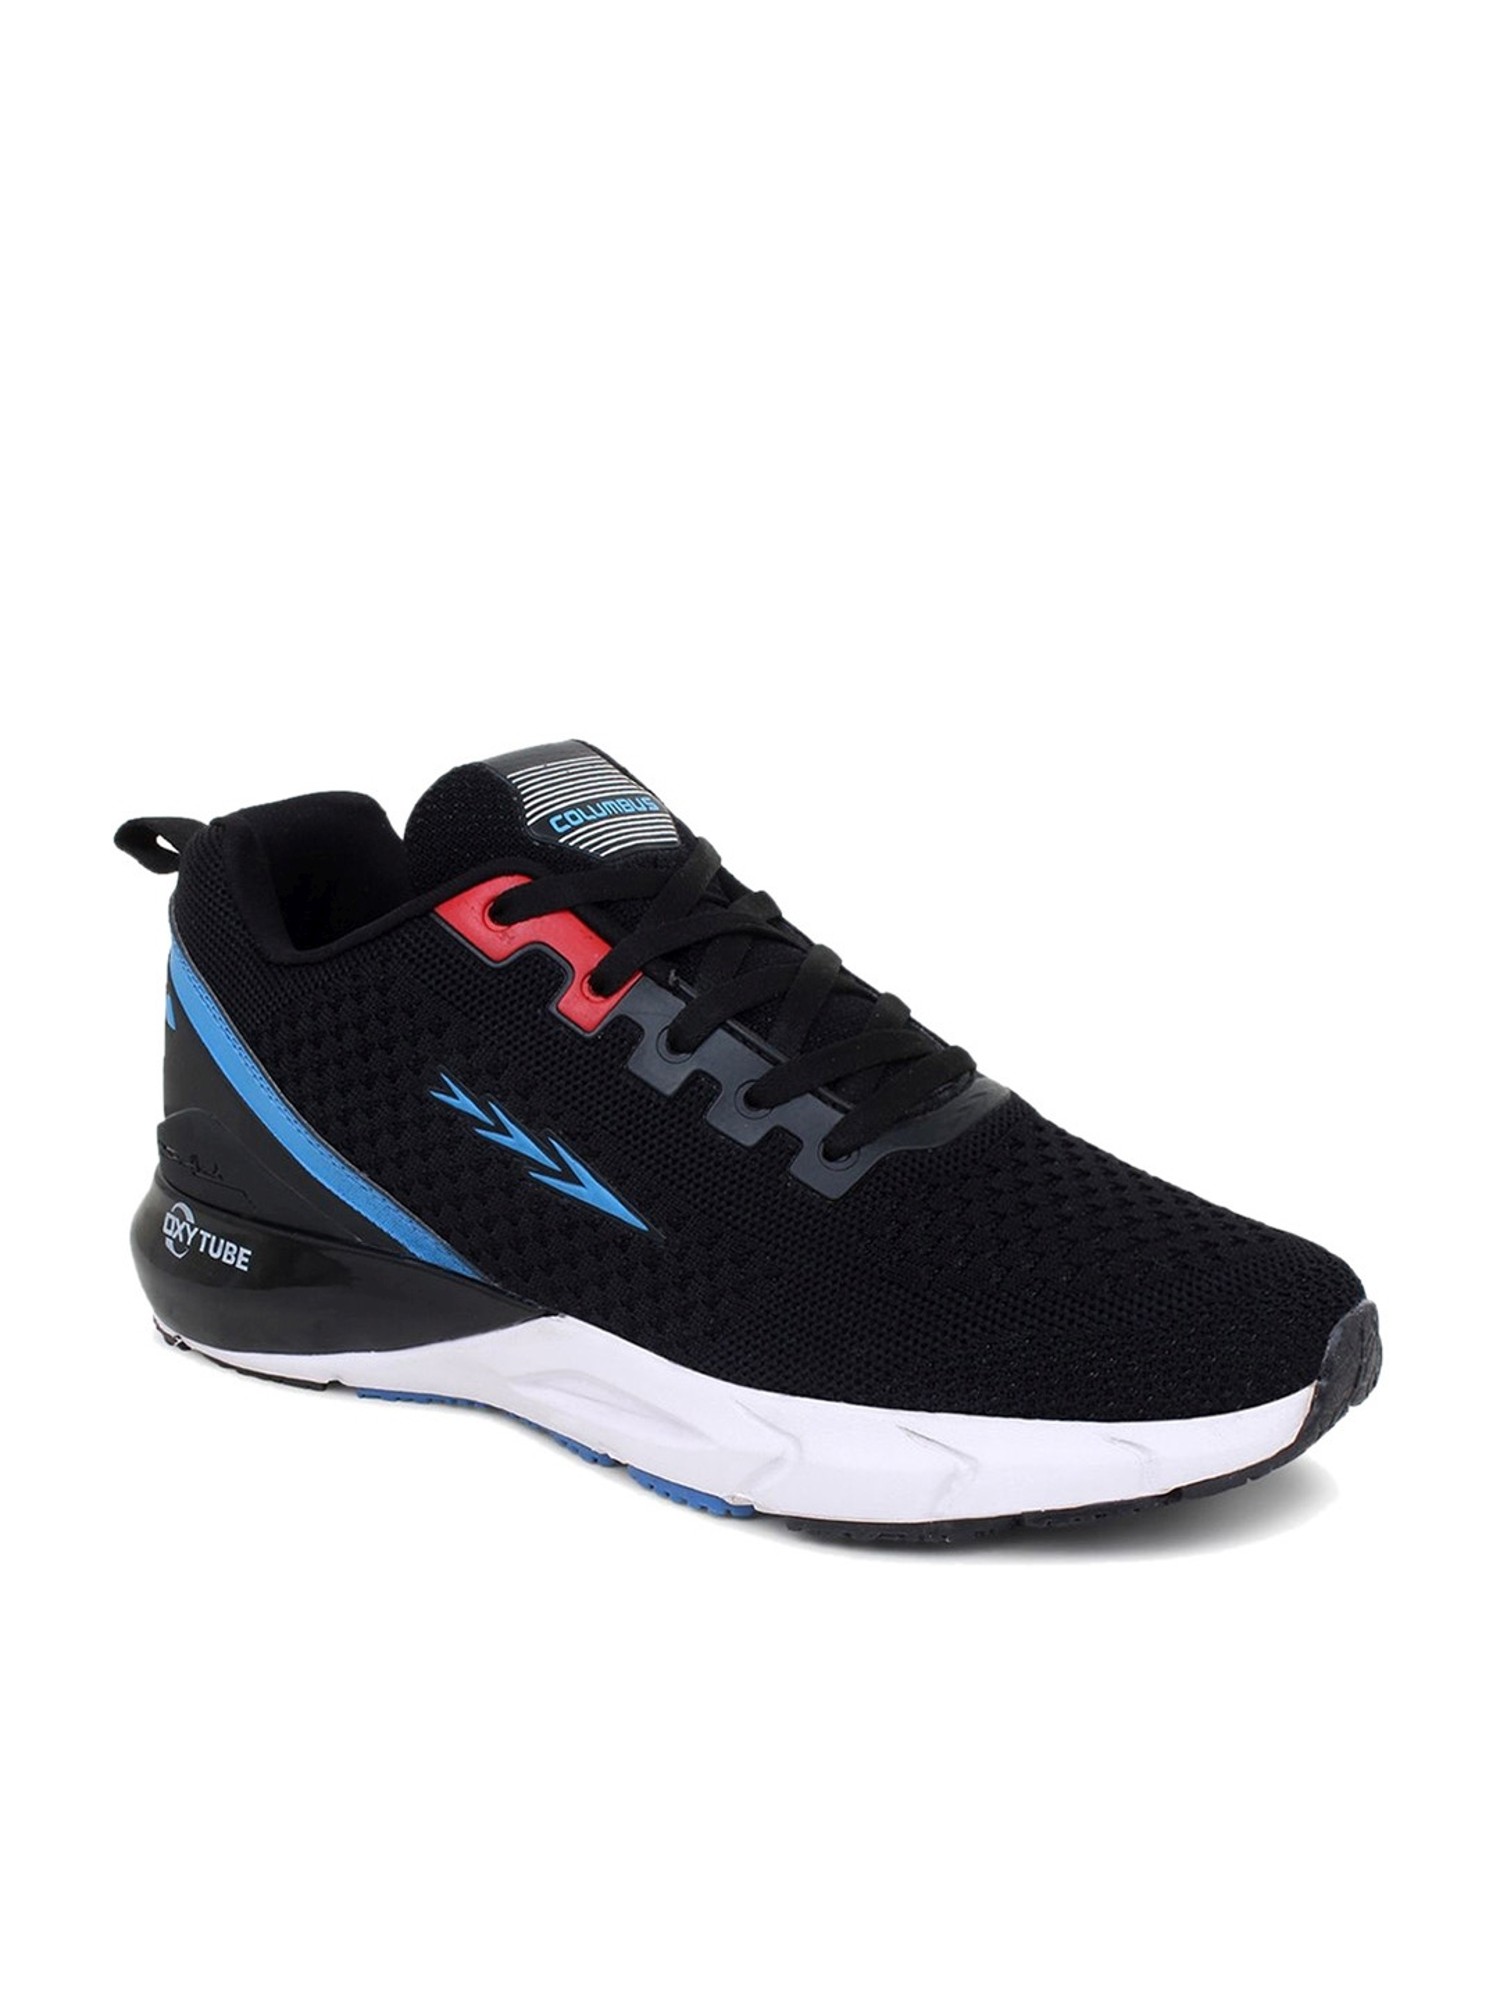 Columbus Shoes - Columbus Sports Shoes Price, Manufacturers & Suppliers